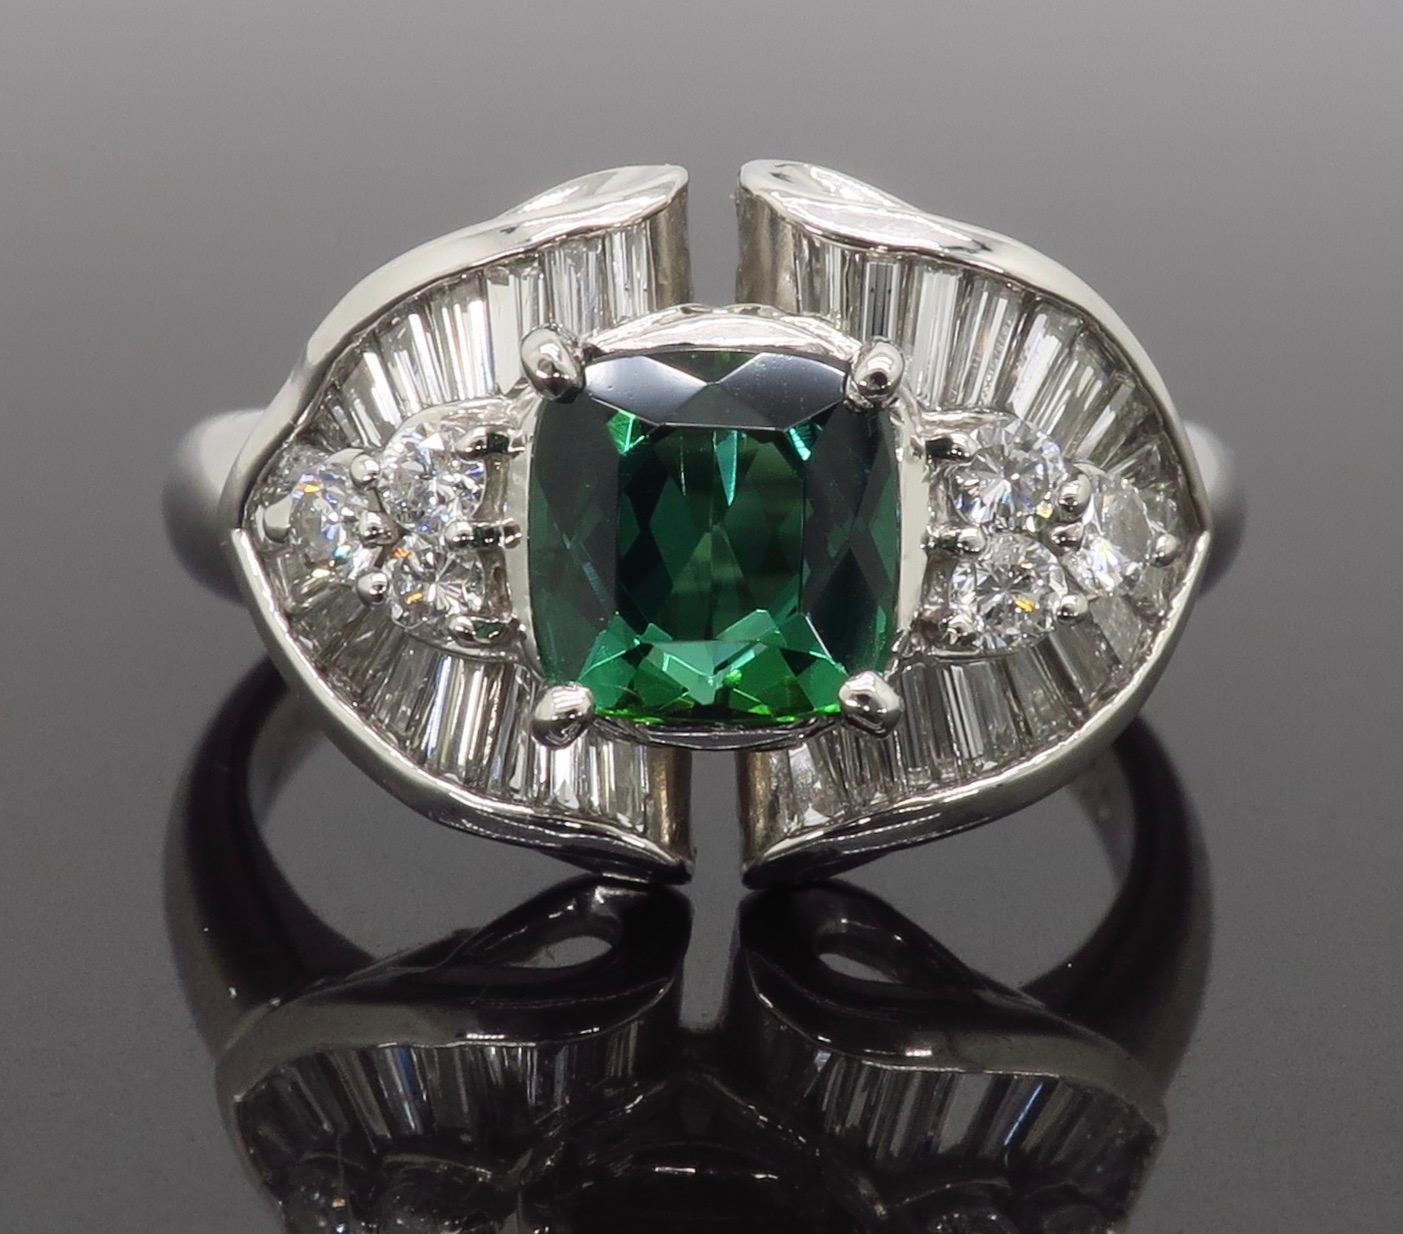 Unique green tourmaline and diamond cocktail ring crafted in platinum.

Gemstone: Green Tourmaline & Diamonds
Gemstone Carat Weight:  Approximately 1.006CT
Diamond Carat Weight:  Approximately .75CTW
Diamond Cut: Round Brilliant Cut and Tapered